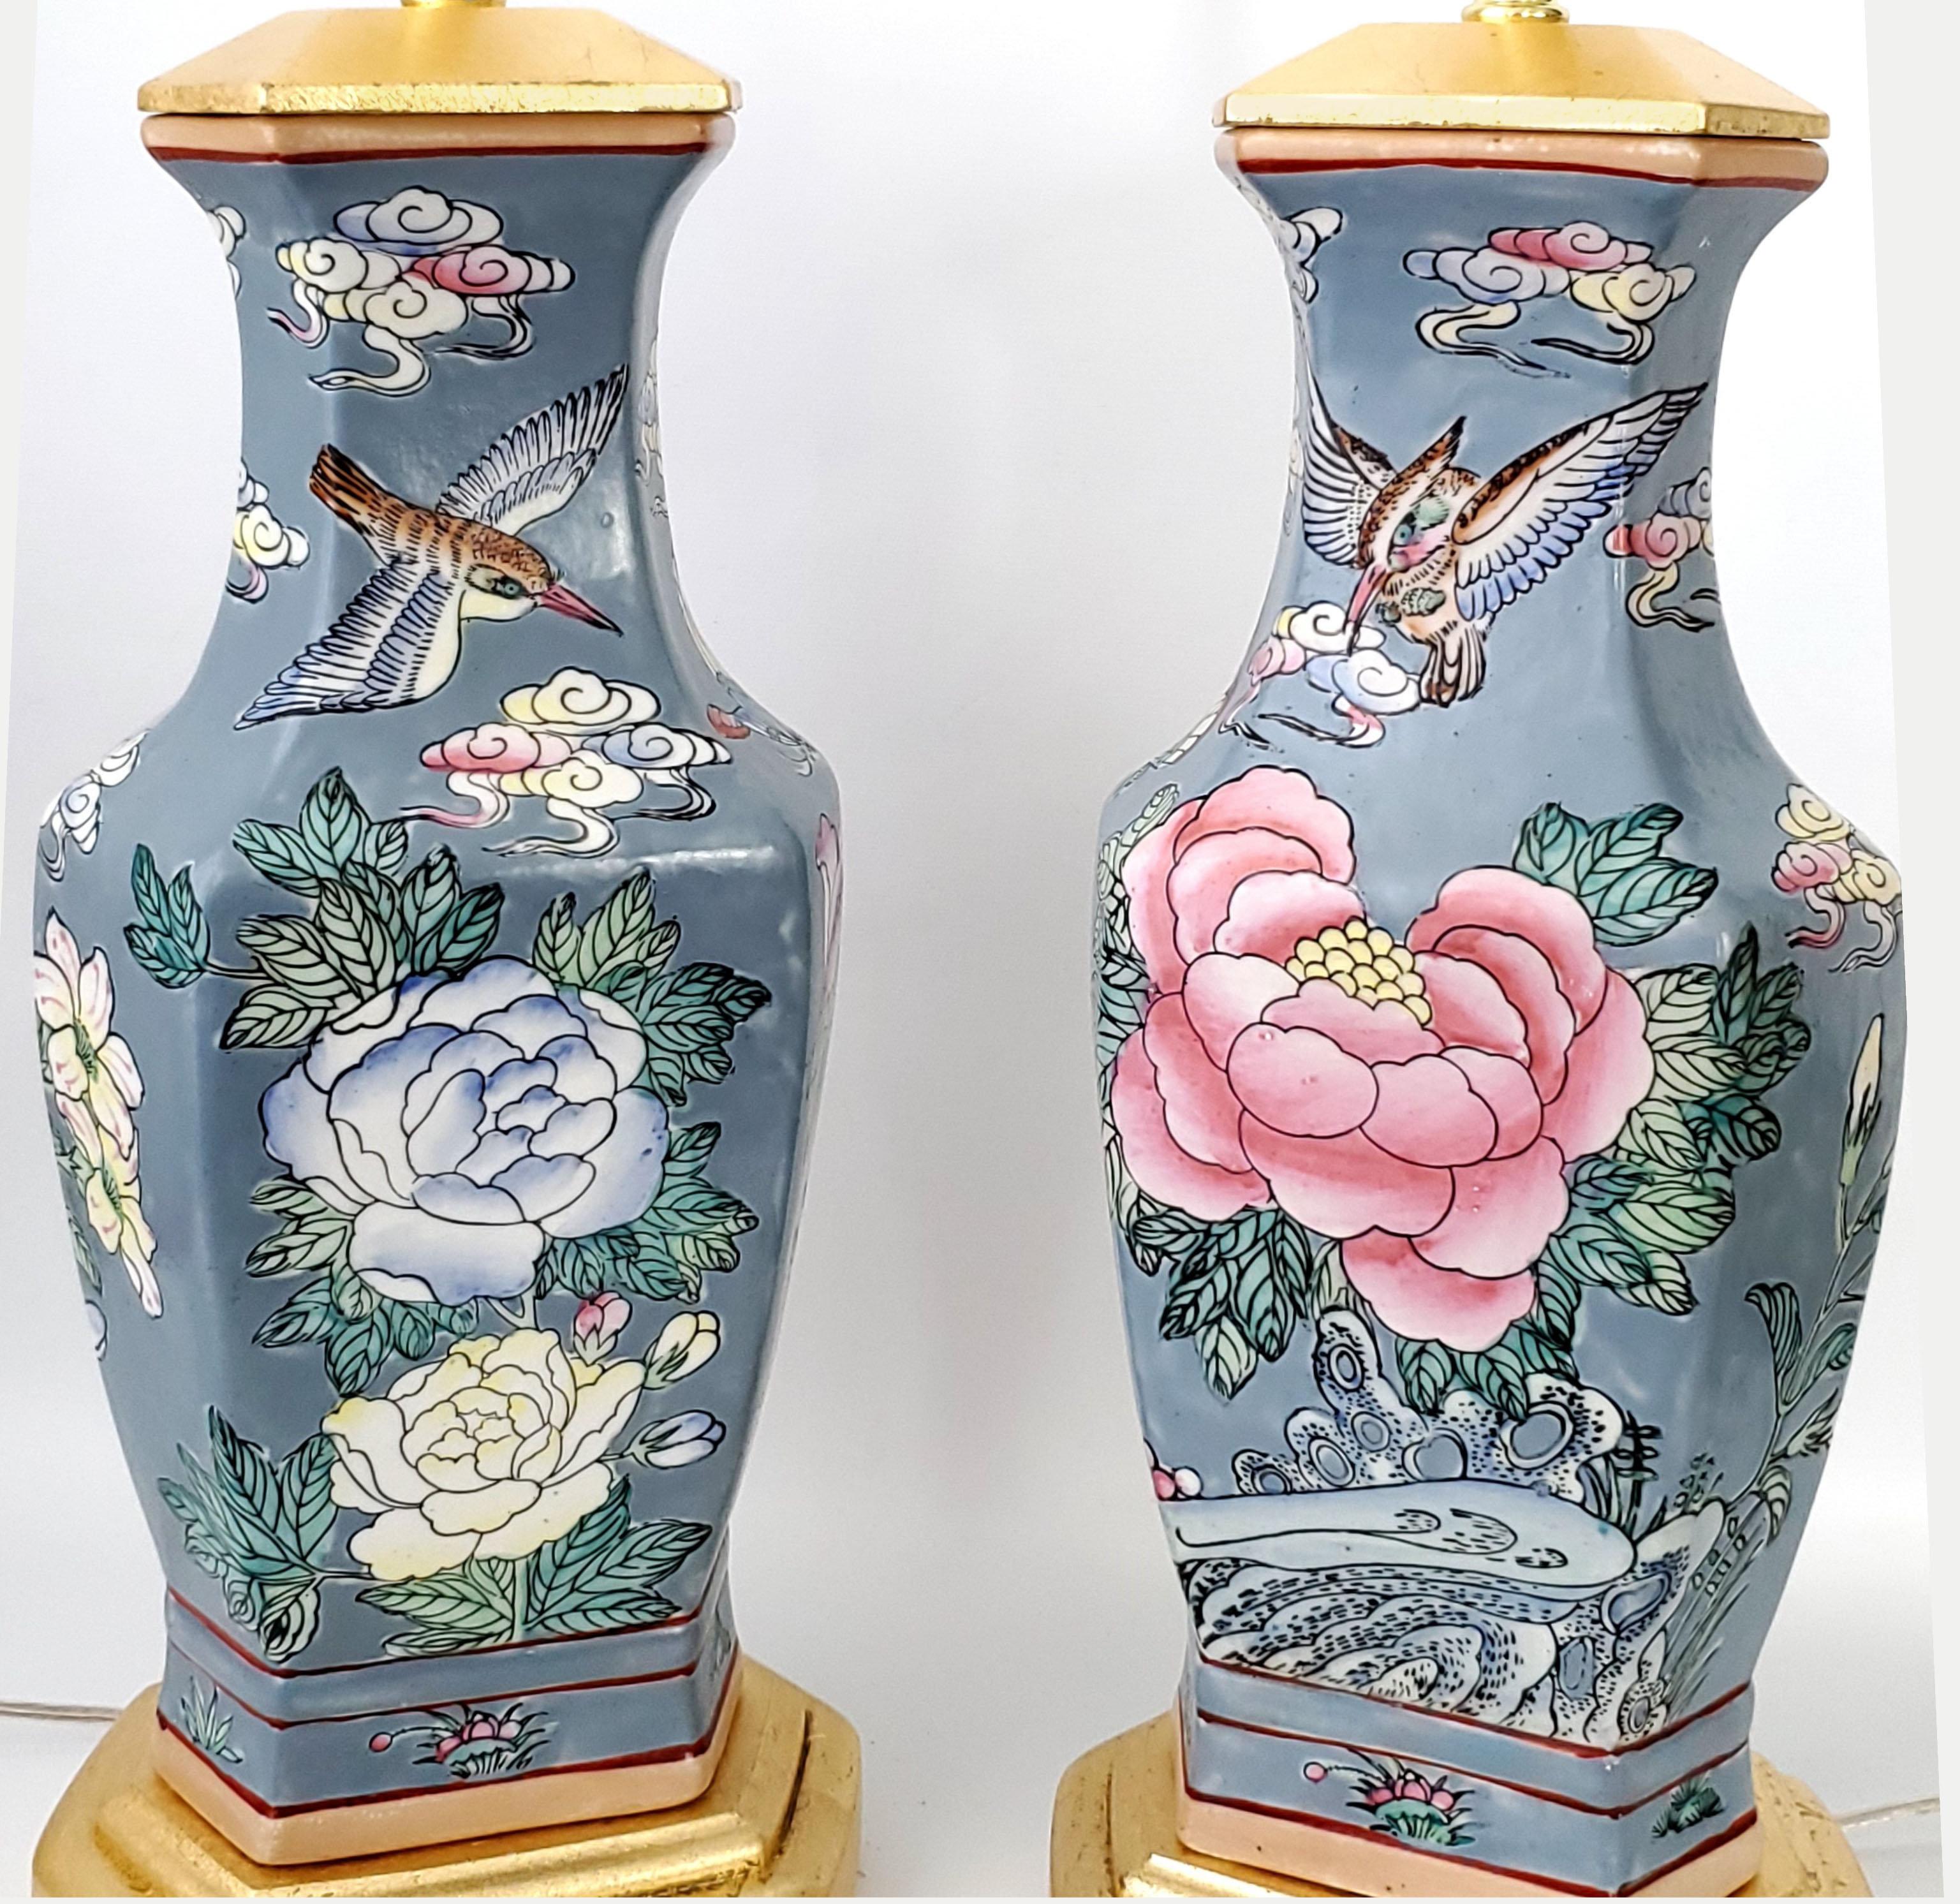 Pair of Vintage Chinese Porcelain Ceramic Table Lamps with Pink Lamp Shades For Sale 2